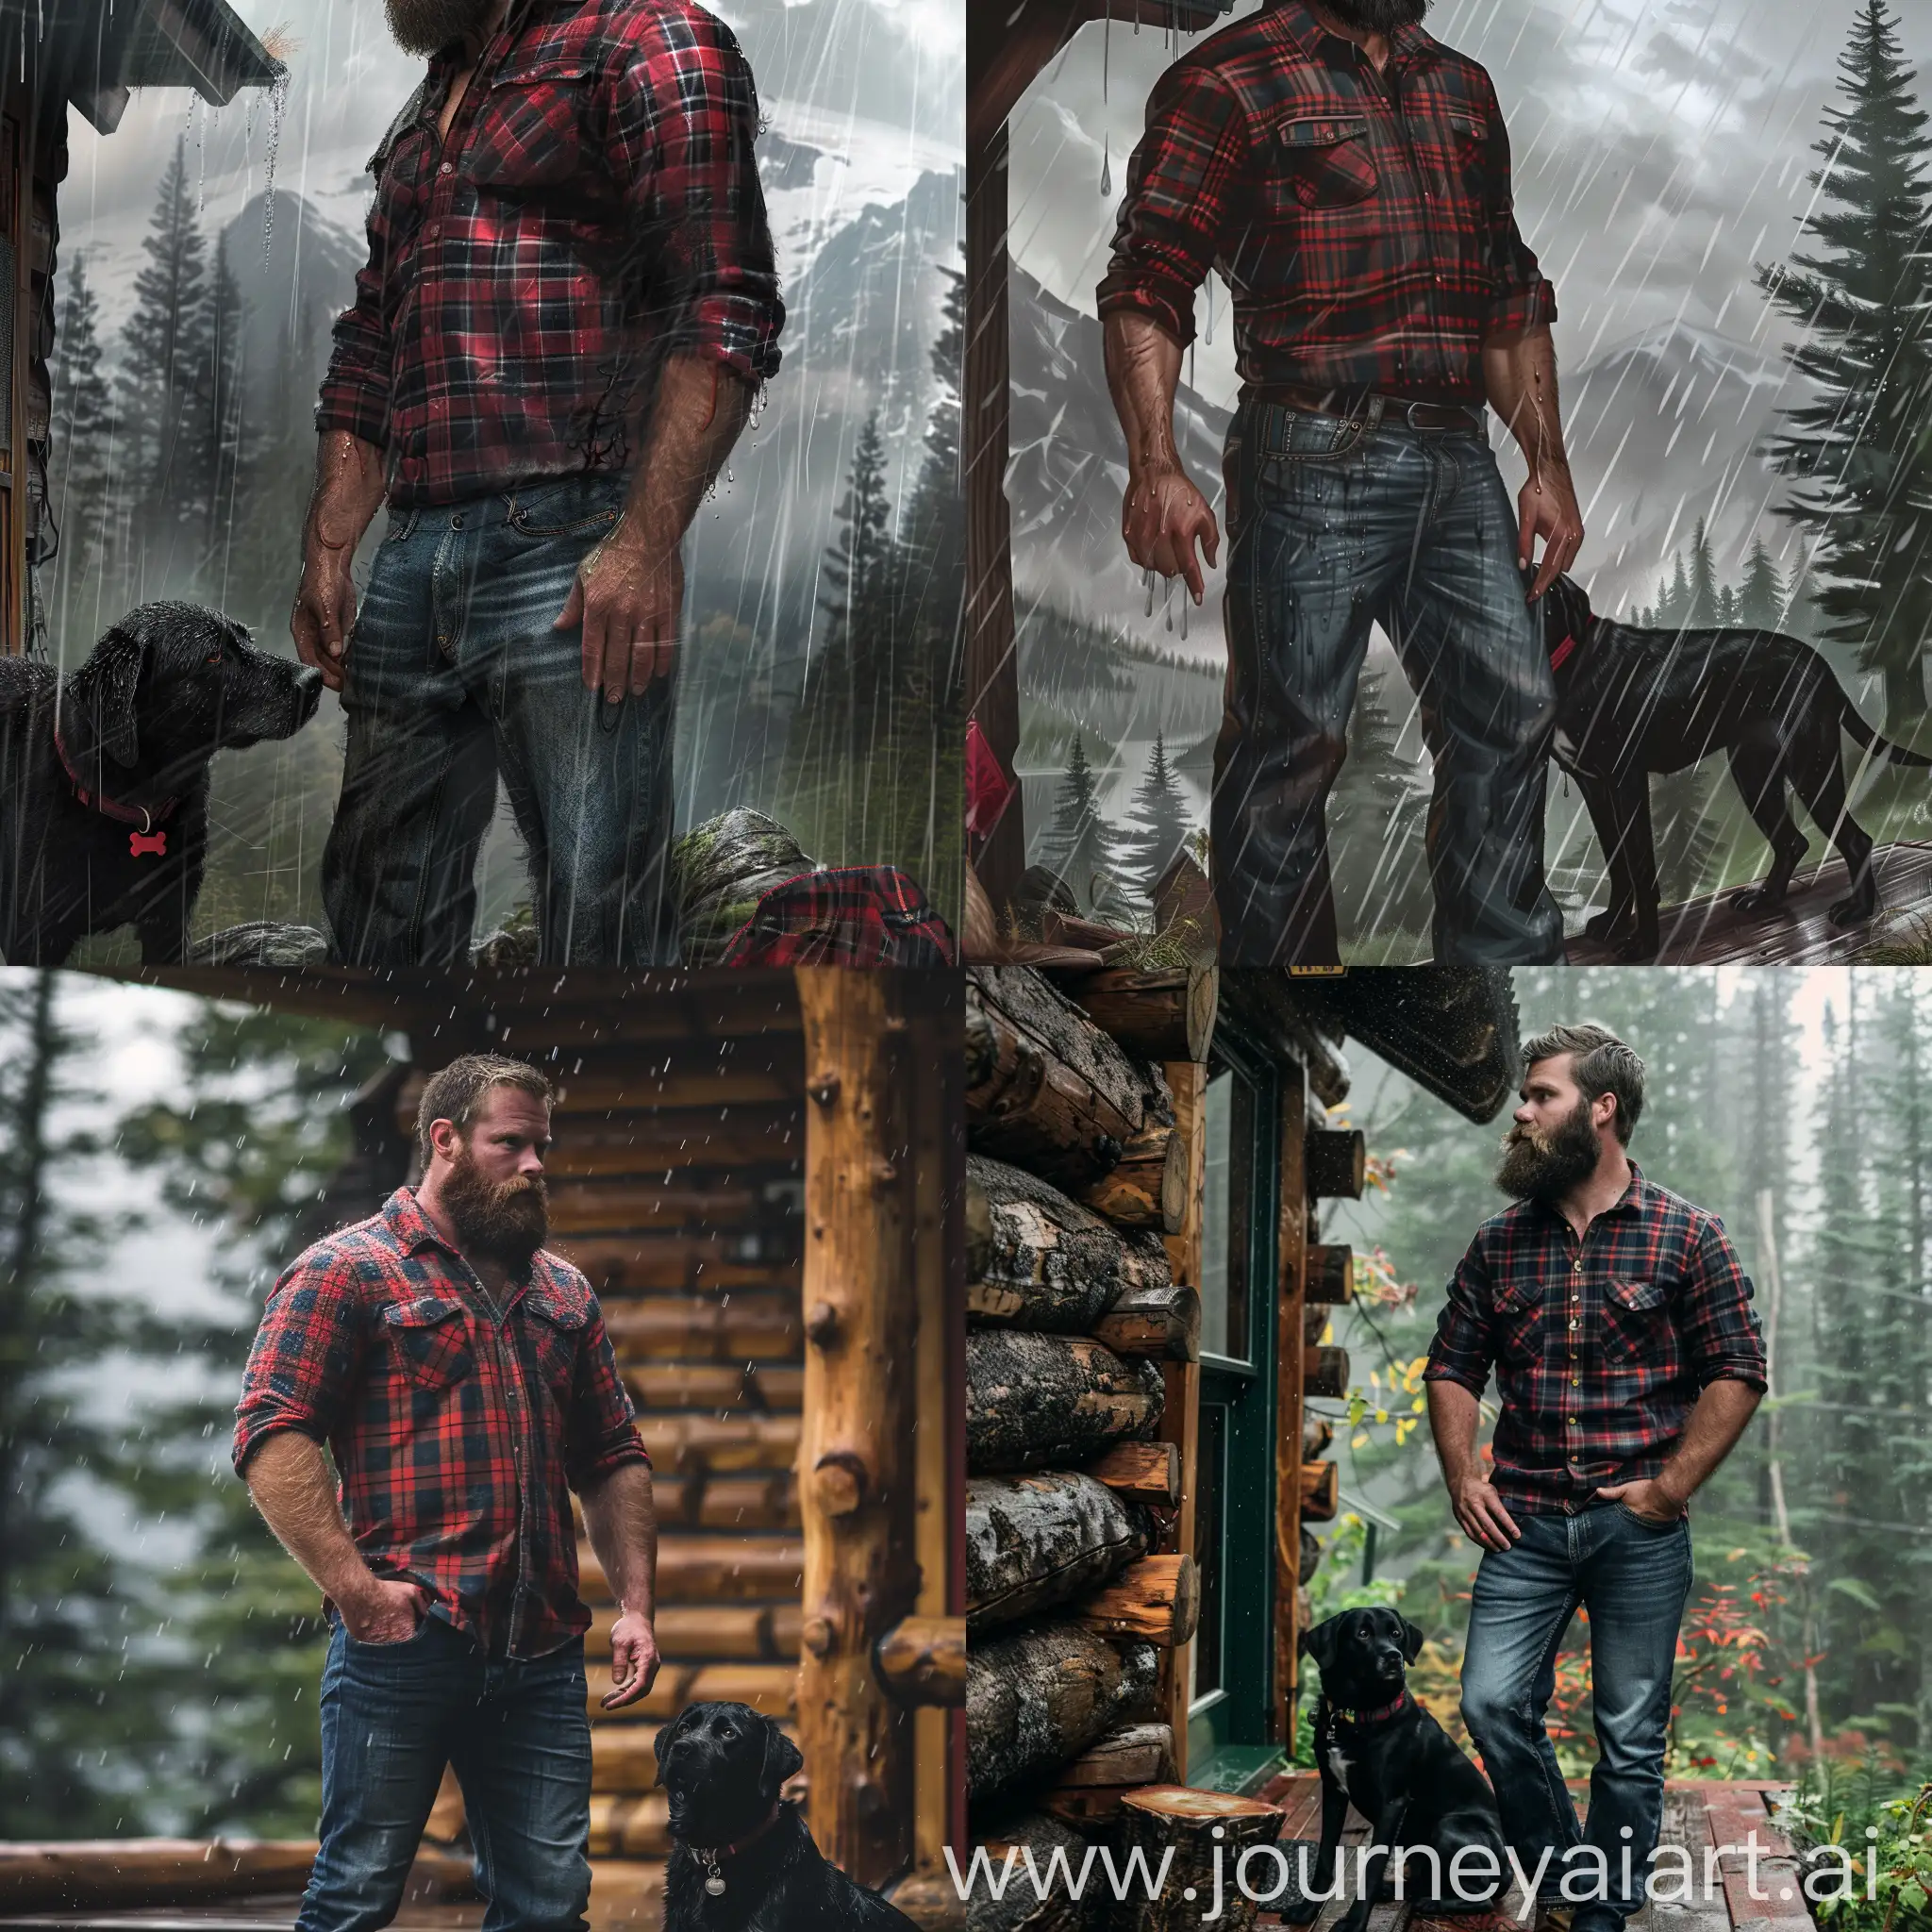 raining day at mountain cabin. Musclar harry beared man, jeans, and plaid shirt, with black lab.